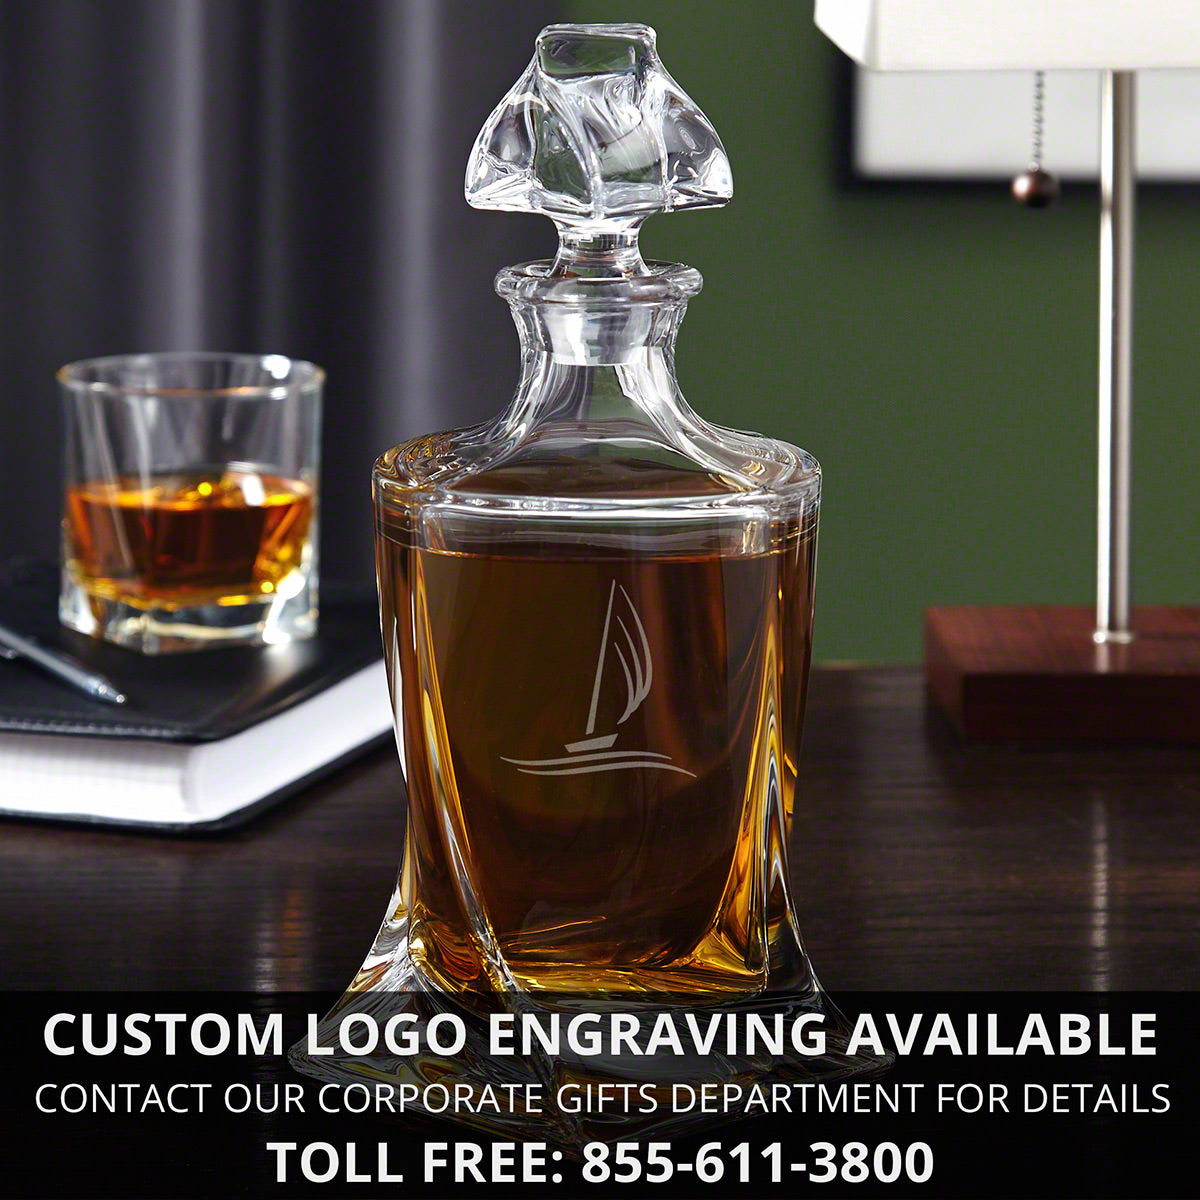 Personalized Vincente Bourbon Decanter Set with Glasses and Gift Box - 5pc